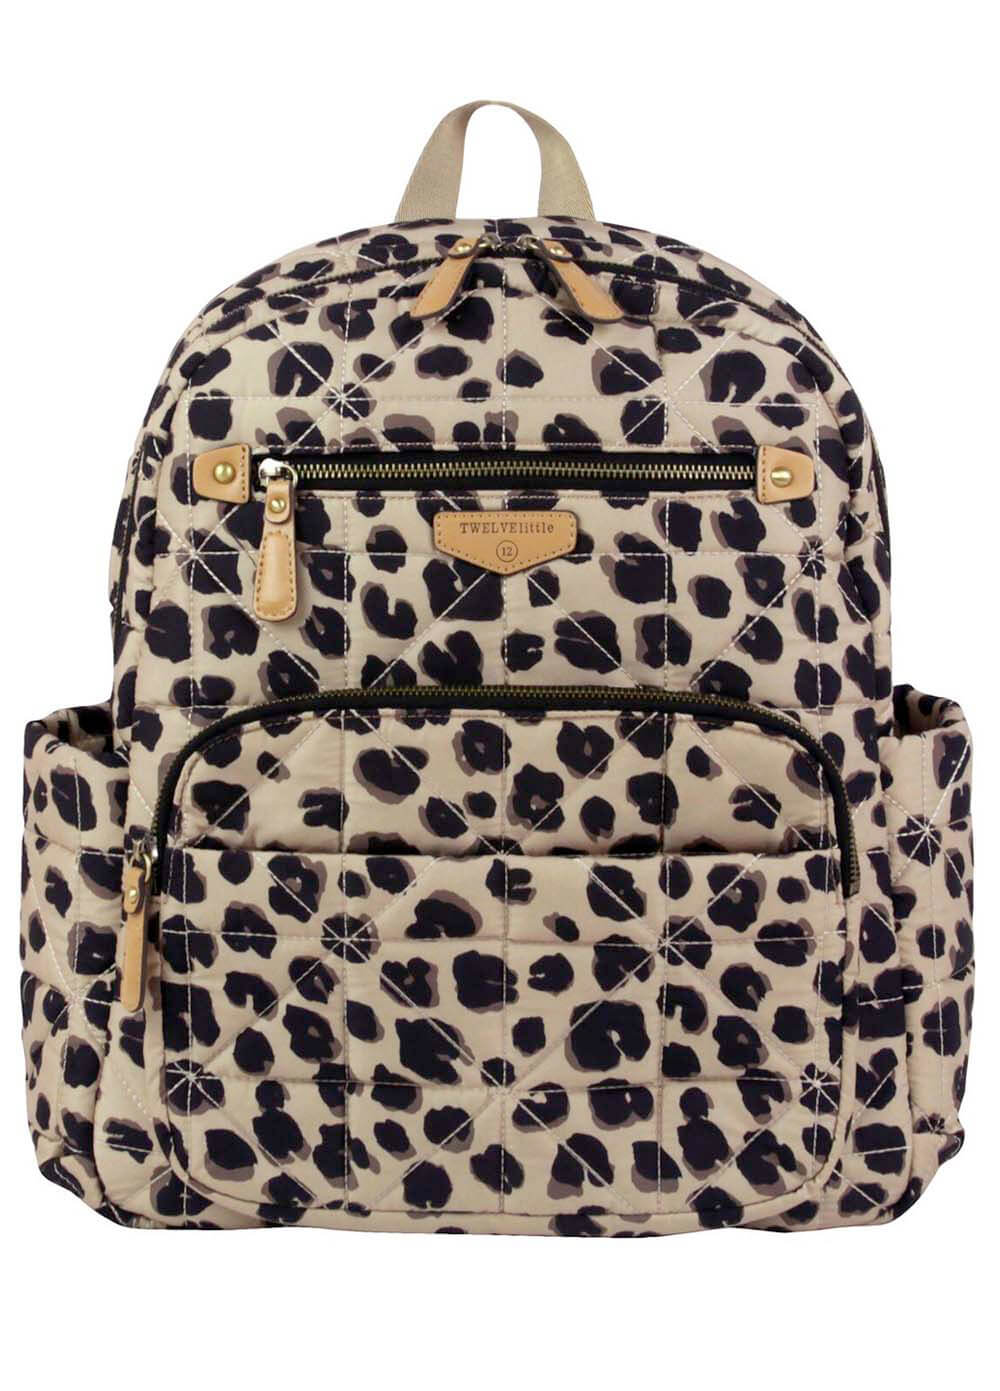 Companion Quilted Nappy Change Backpack in Leopard by TWELVE little